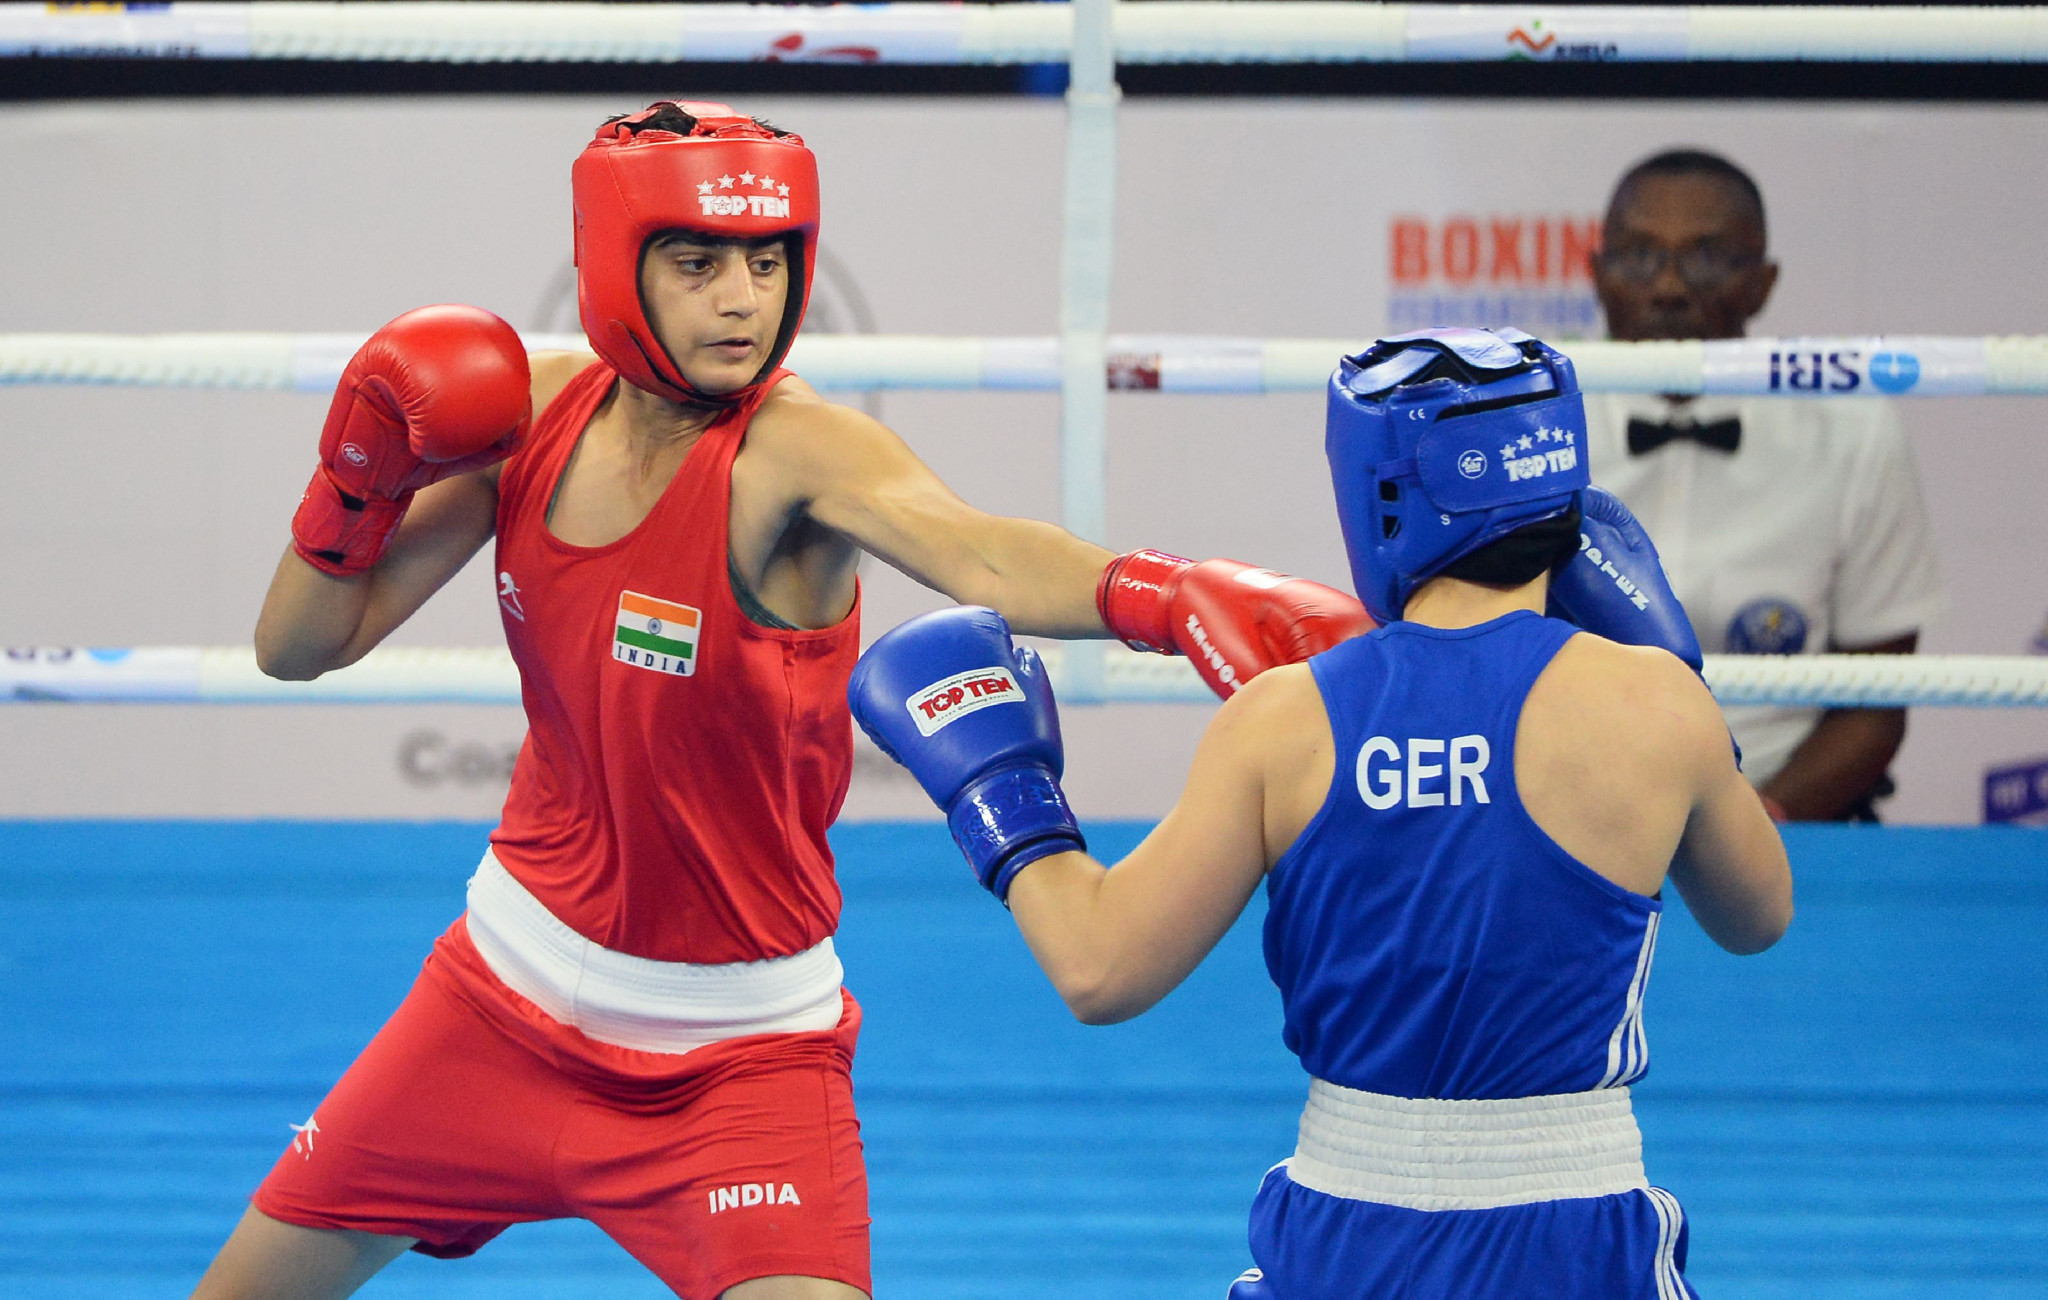 World silver medallist among winners as India make strong start to ASBC Elite Boxing Championships